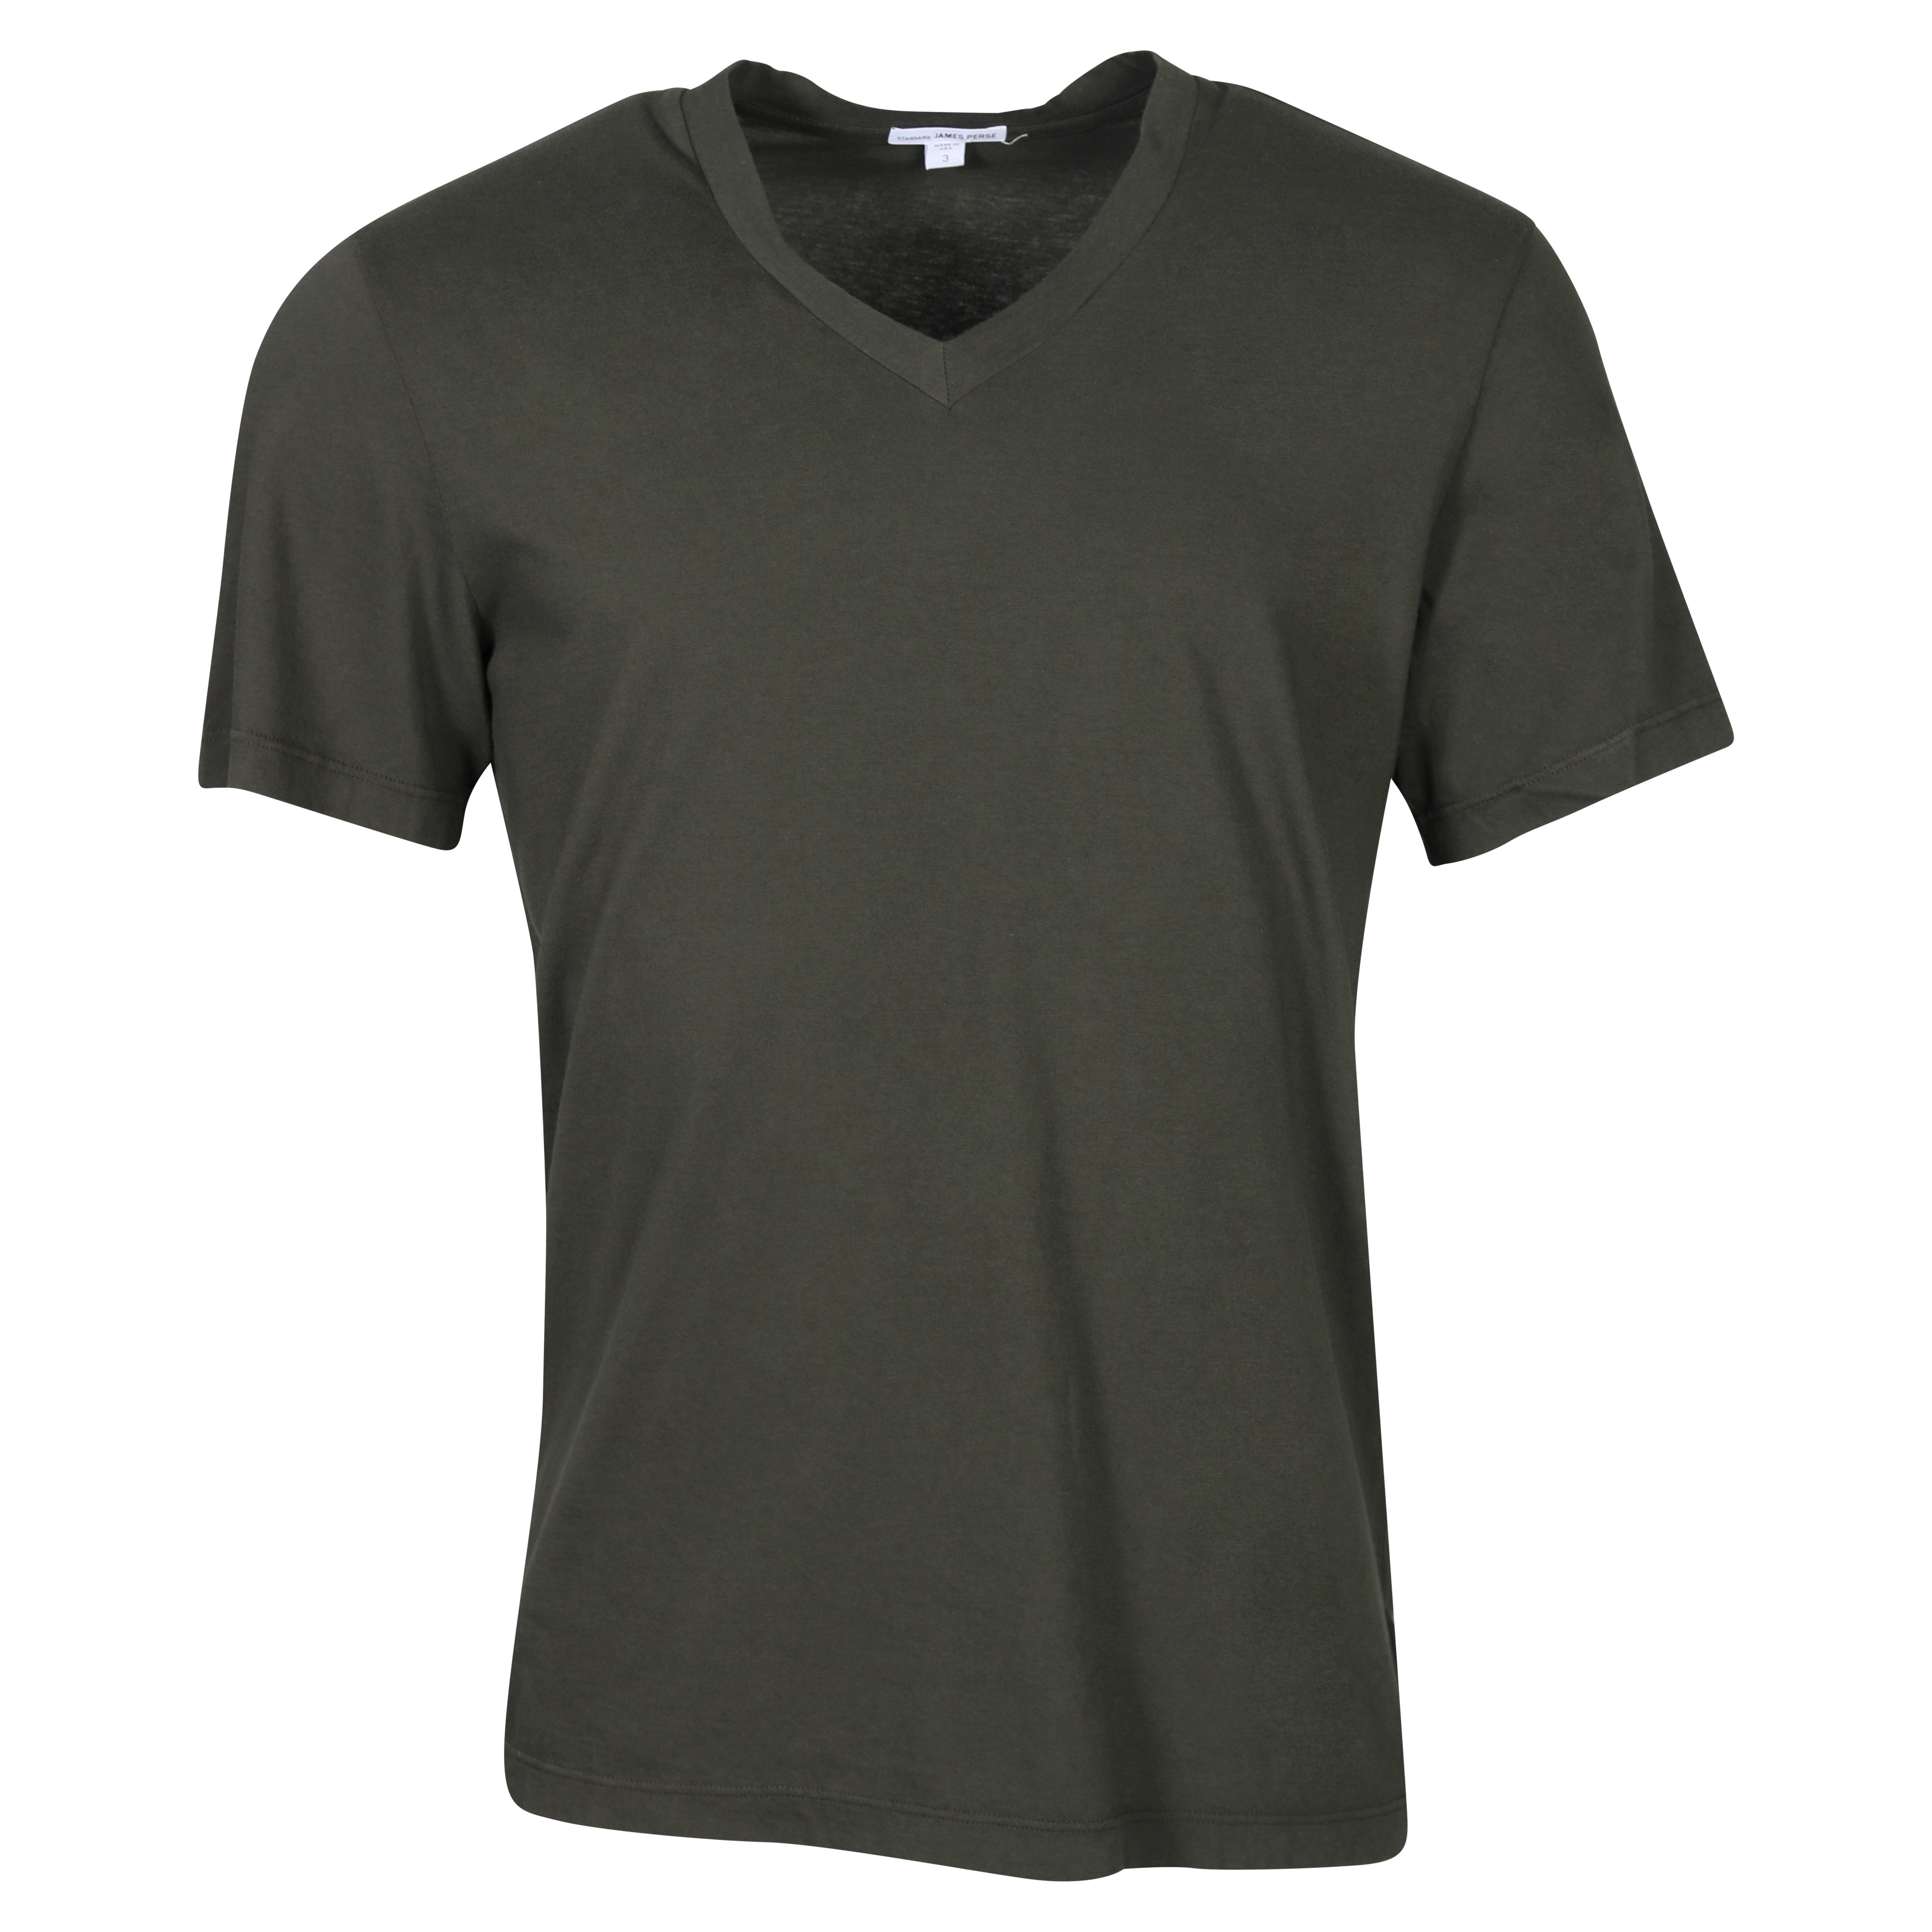 James Perse T-Shirt V-Neck in Olive M/2